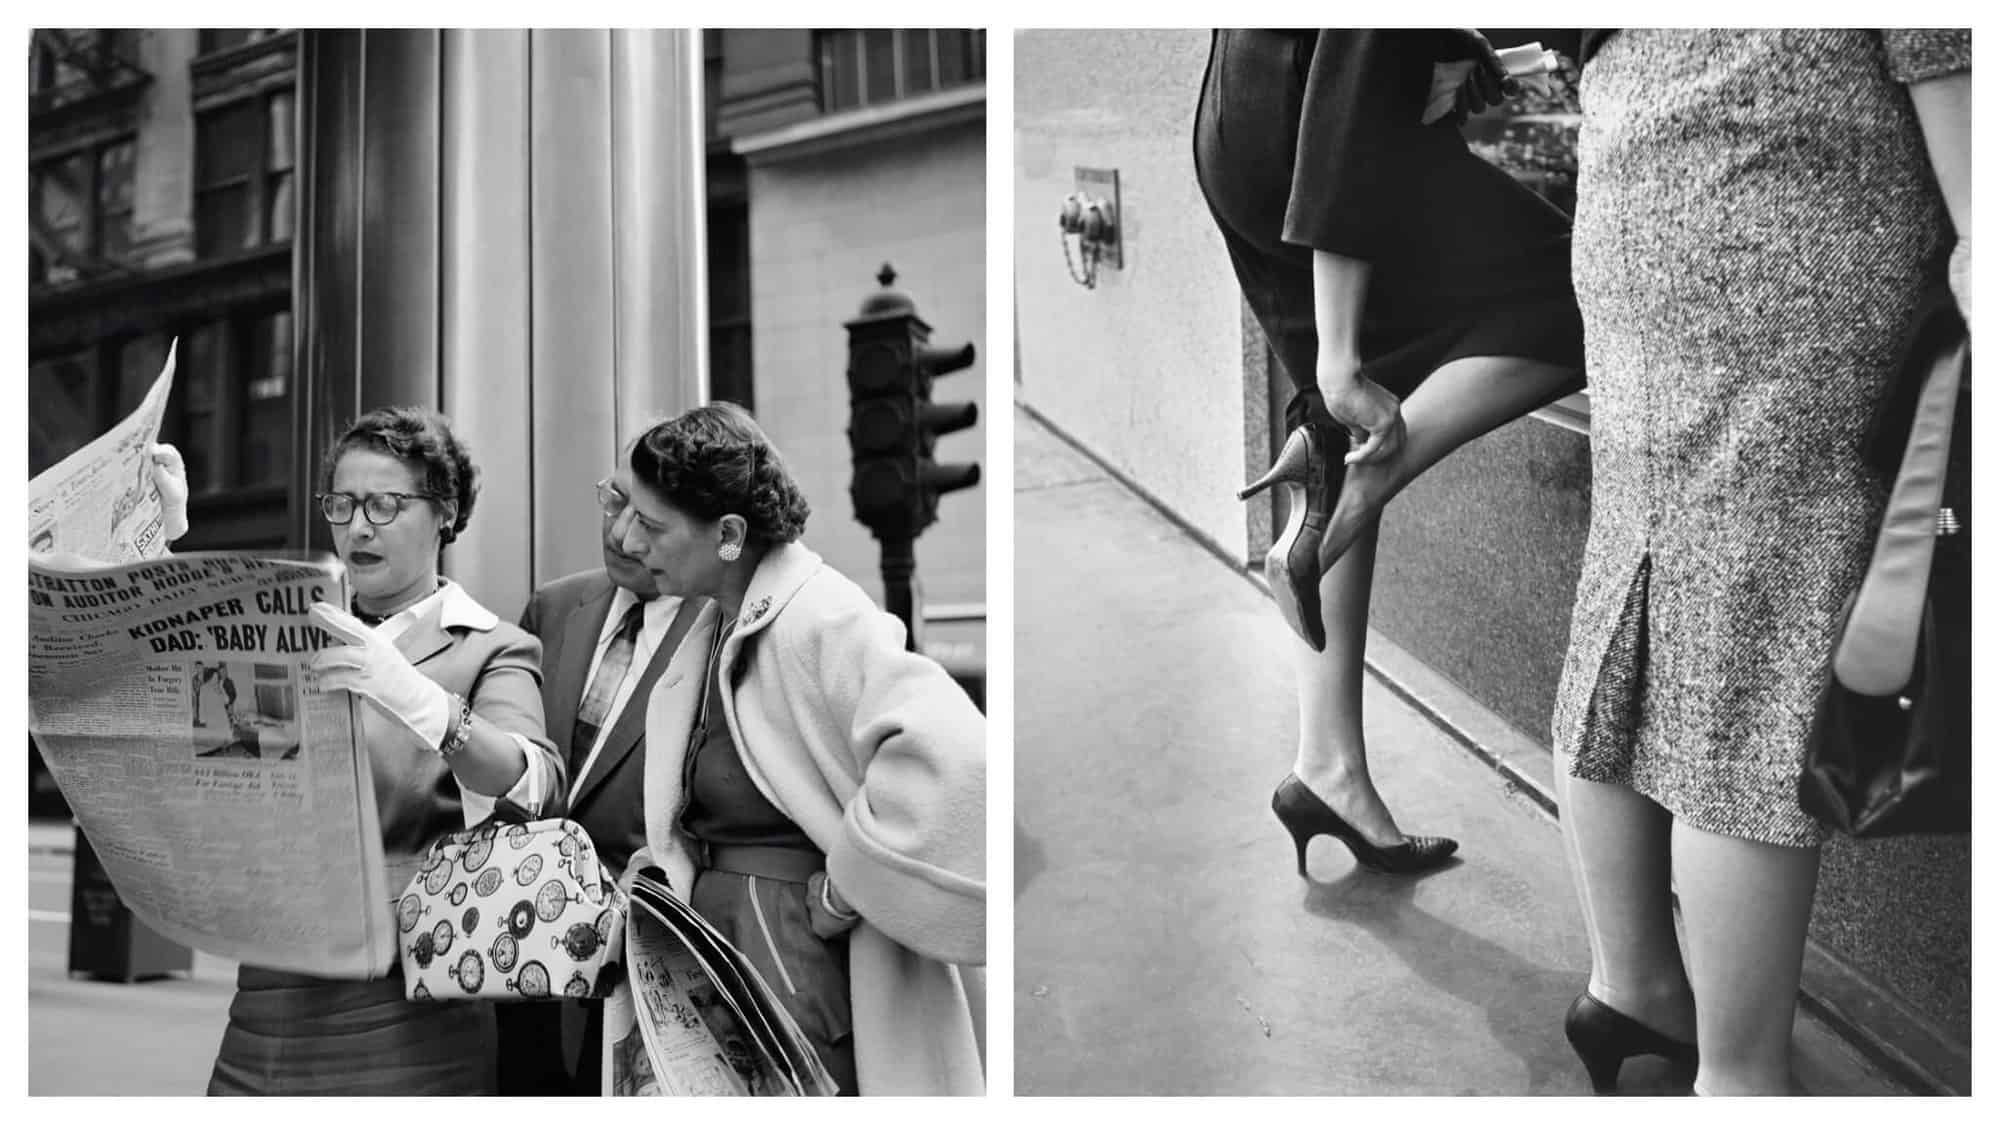 Two black and white photographs by Vivian Maier.